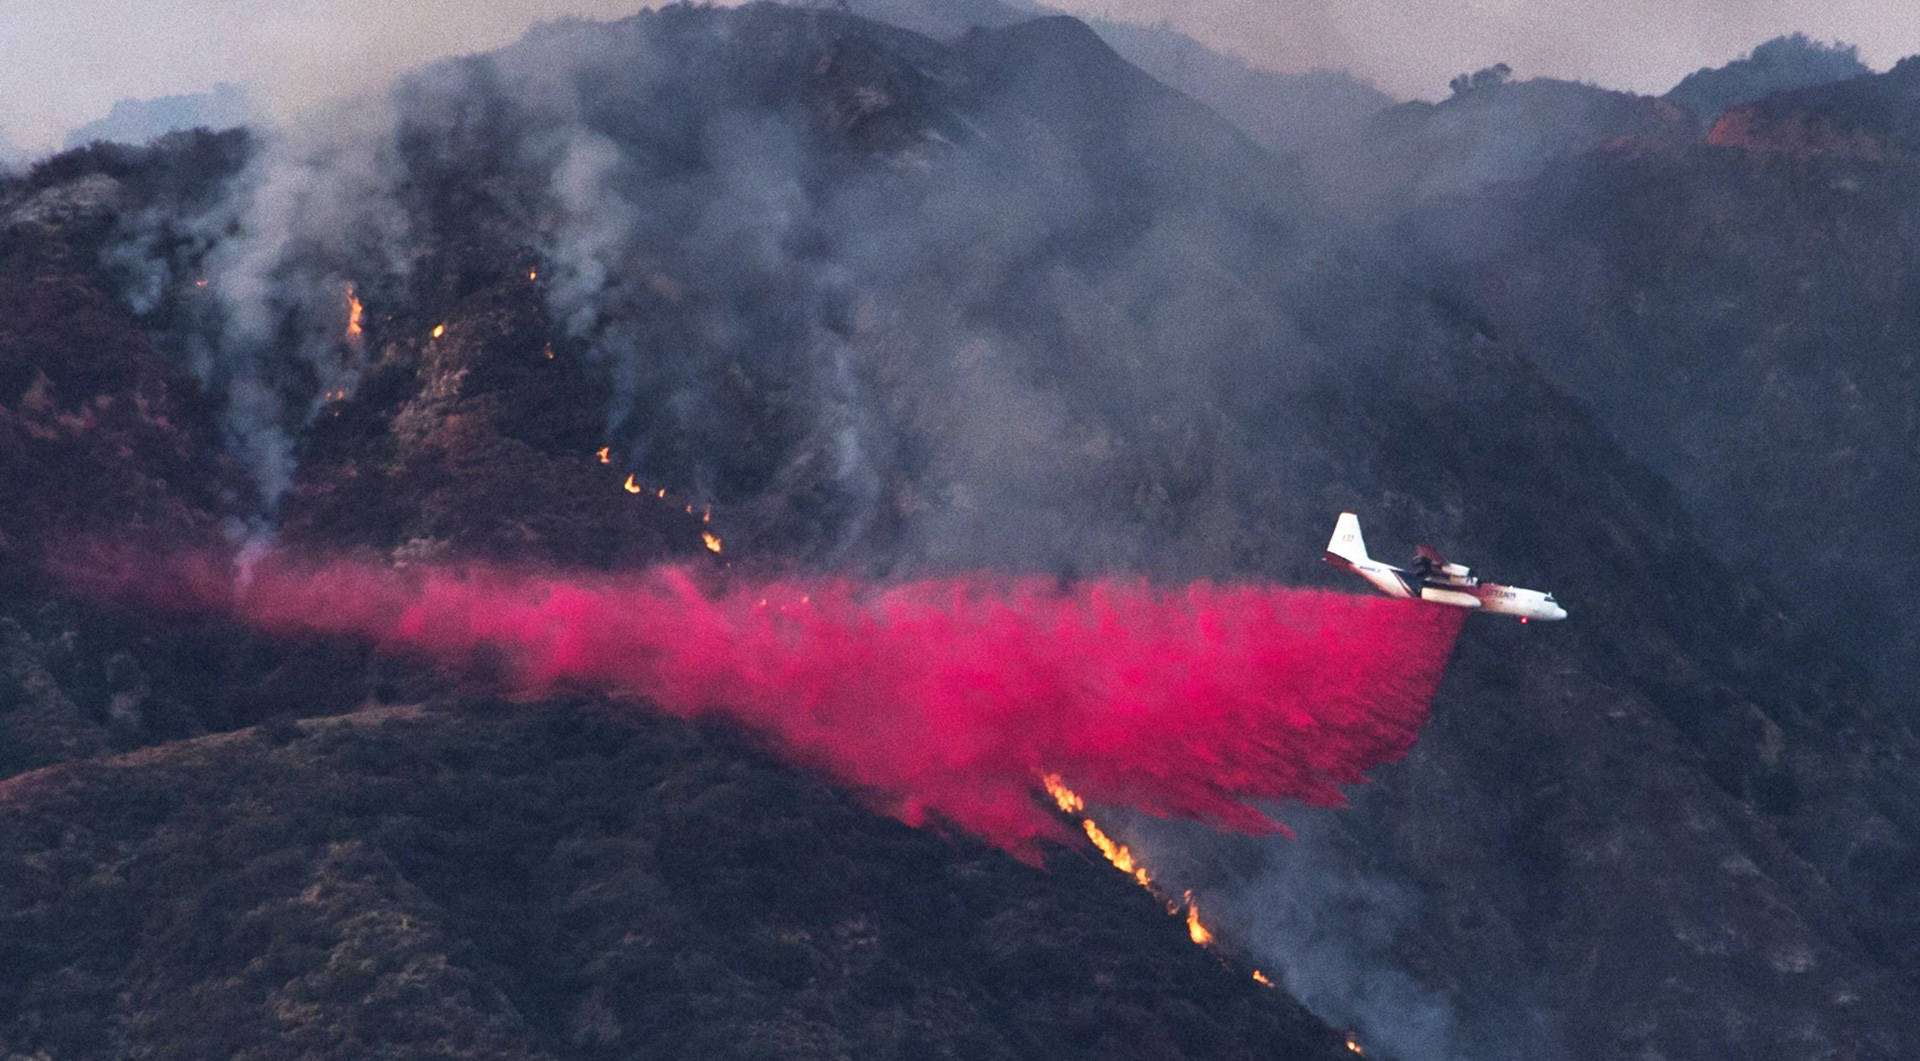 An aircraft drops fire retardant to prevent the advance of the San Gabriel Complex Fire in the Angeles National Forest, near Duarte on June 21, 2016. Robyn Beck/AFP/Getty Images